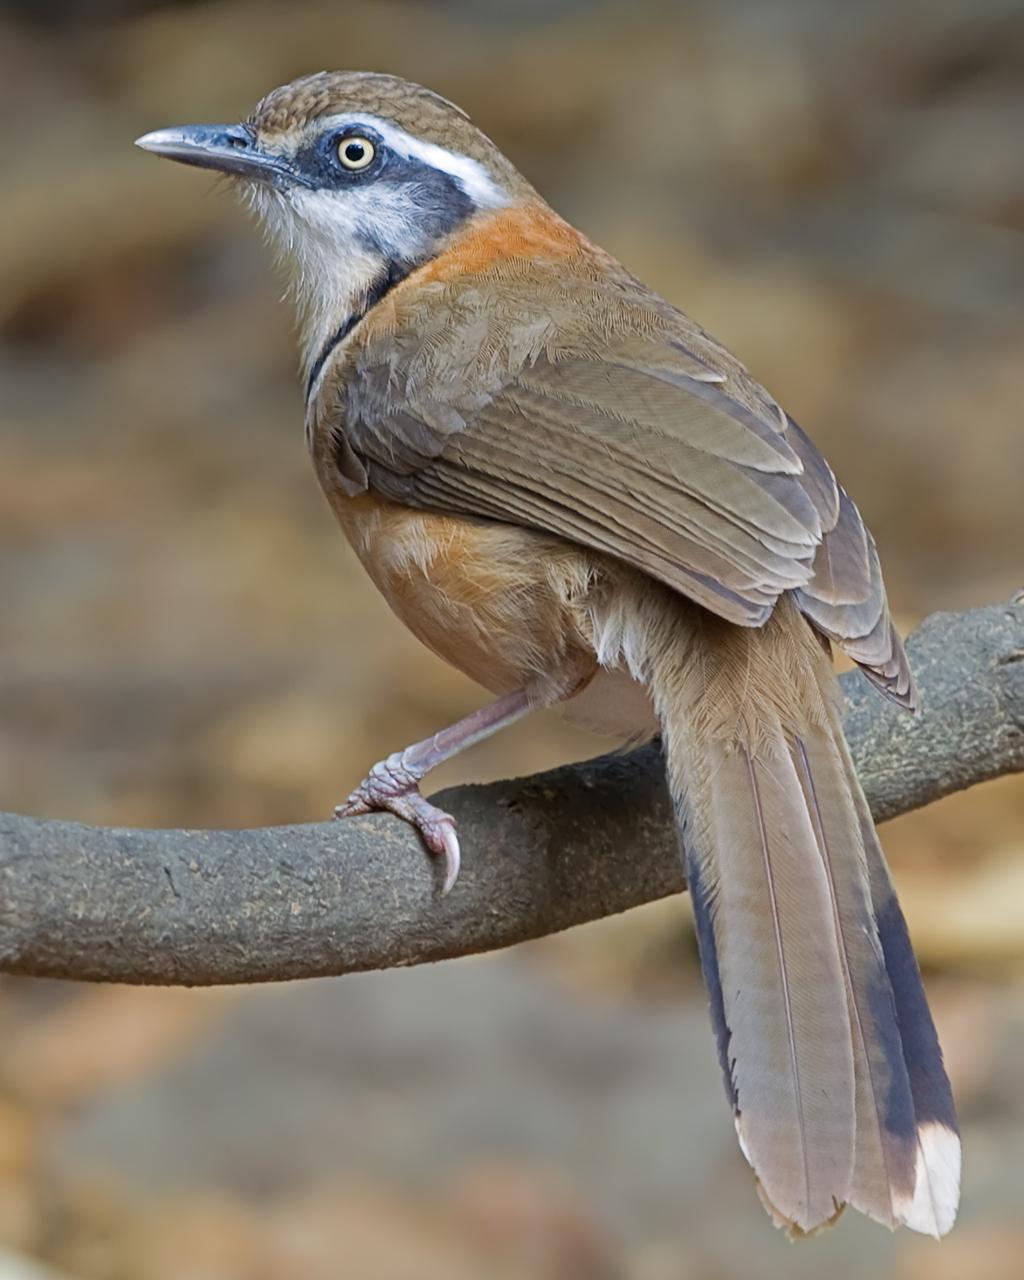 Lesser Necklaced Laughingthrush Photo by Alex Vargas